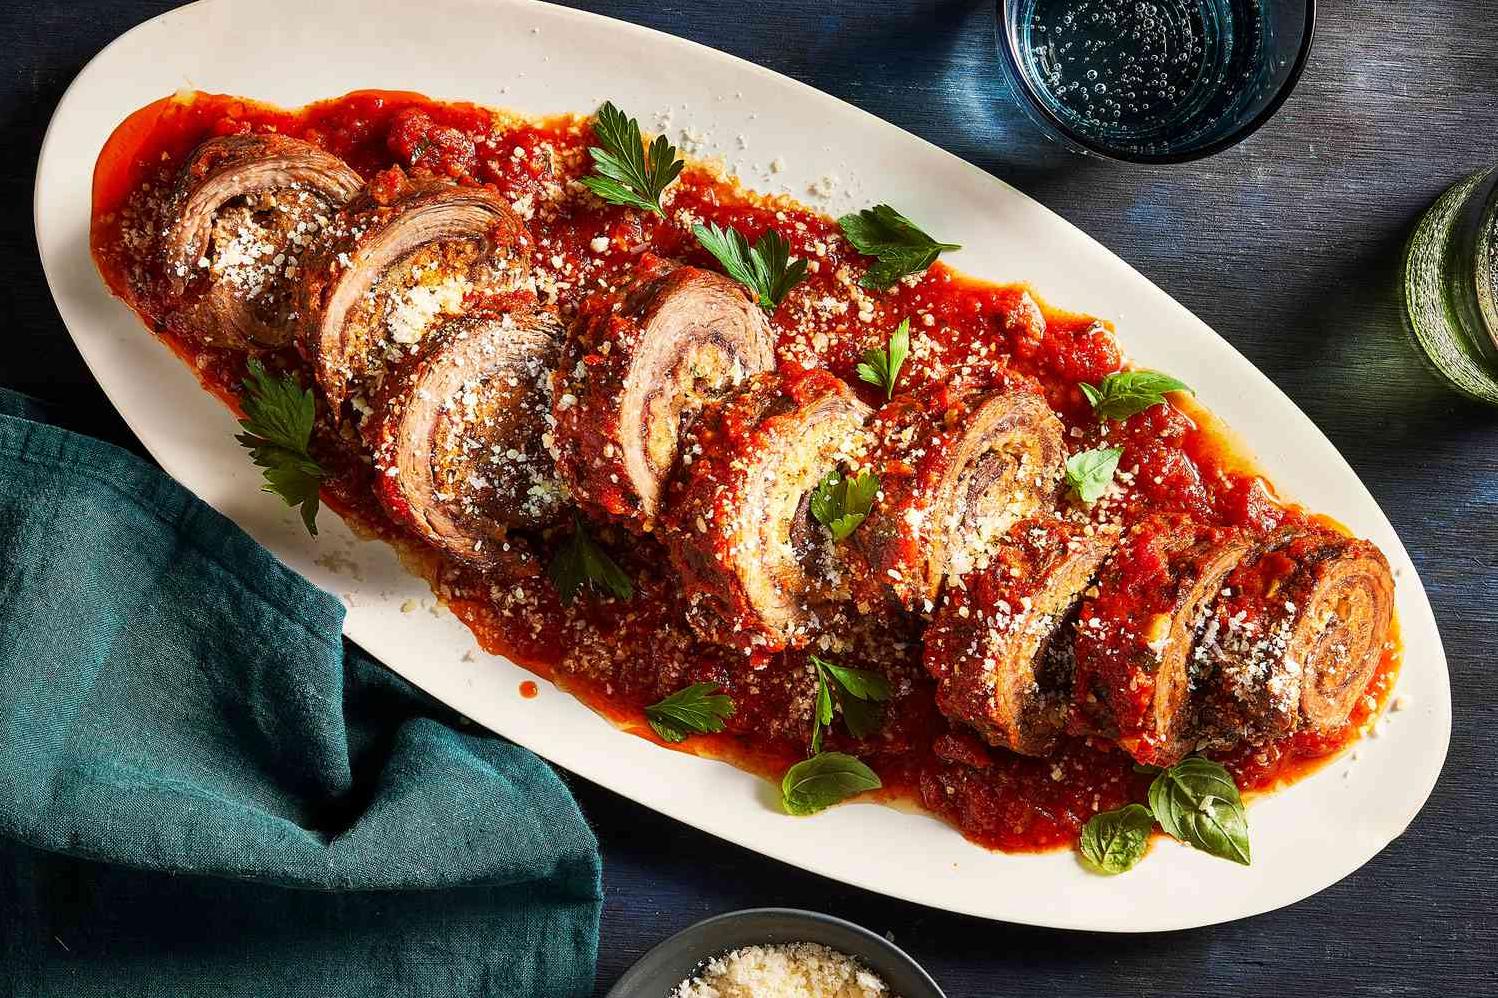  The rich and flavorful tomato and wine sauce takes this dish to the next level.